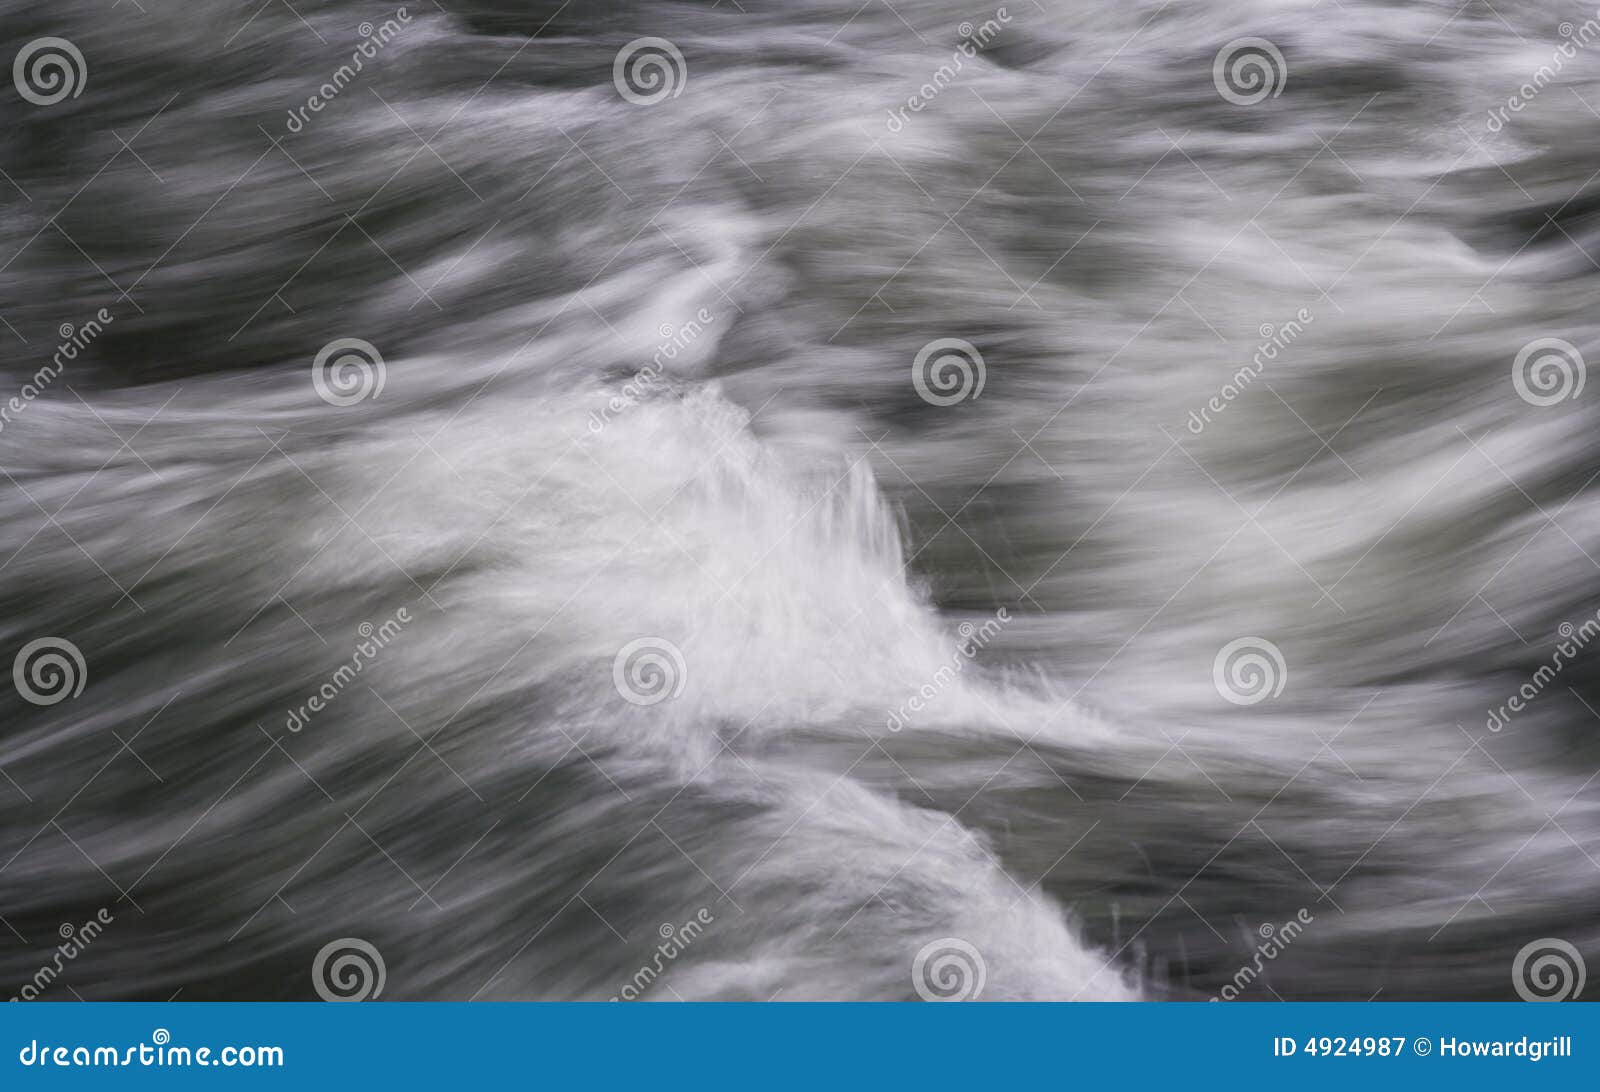 flowing, rushing water abstract